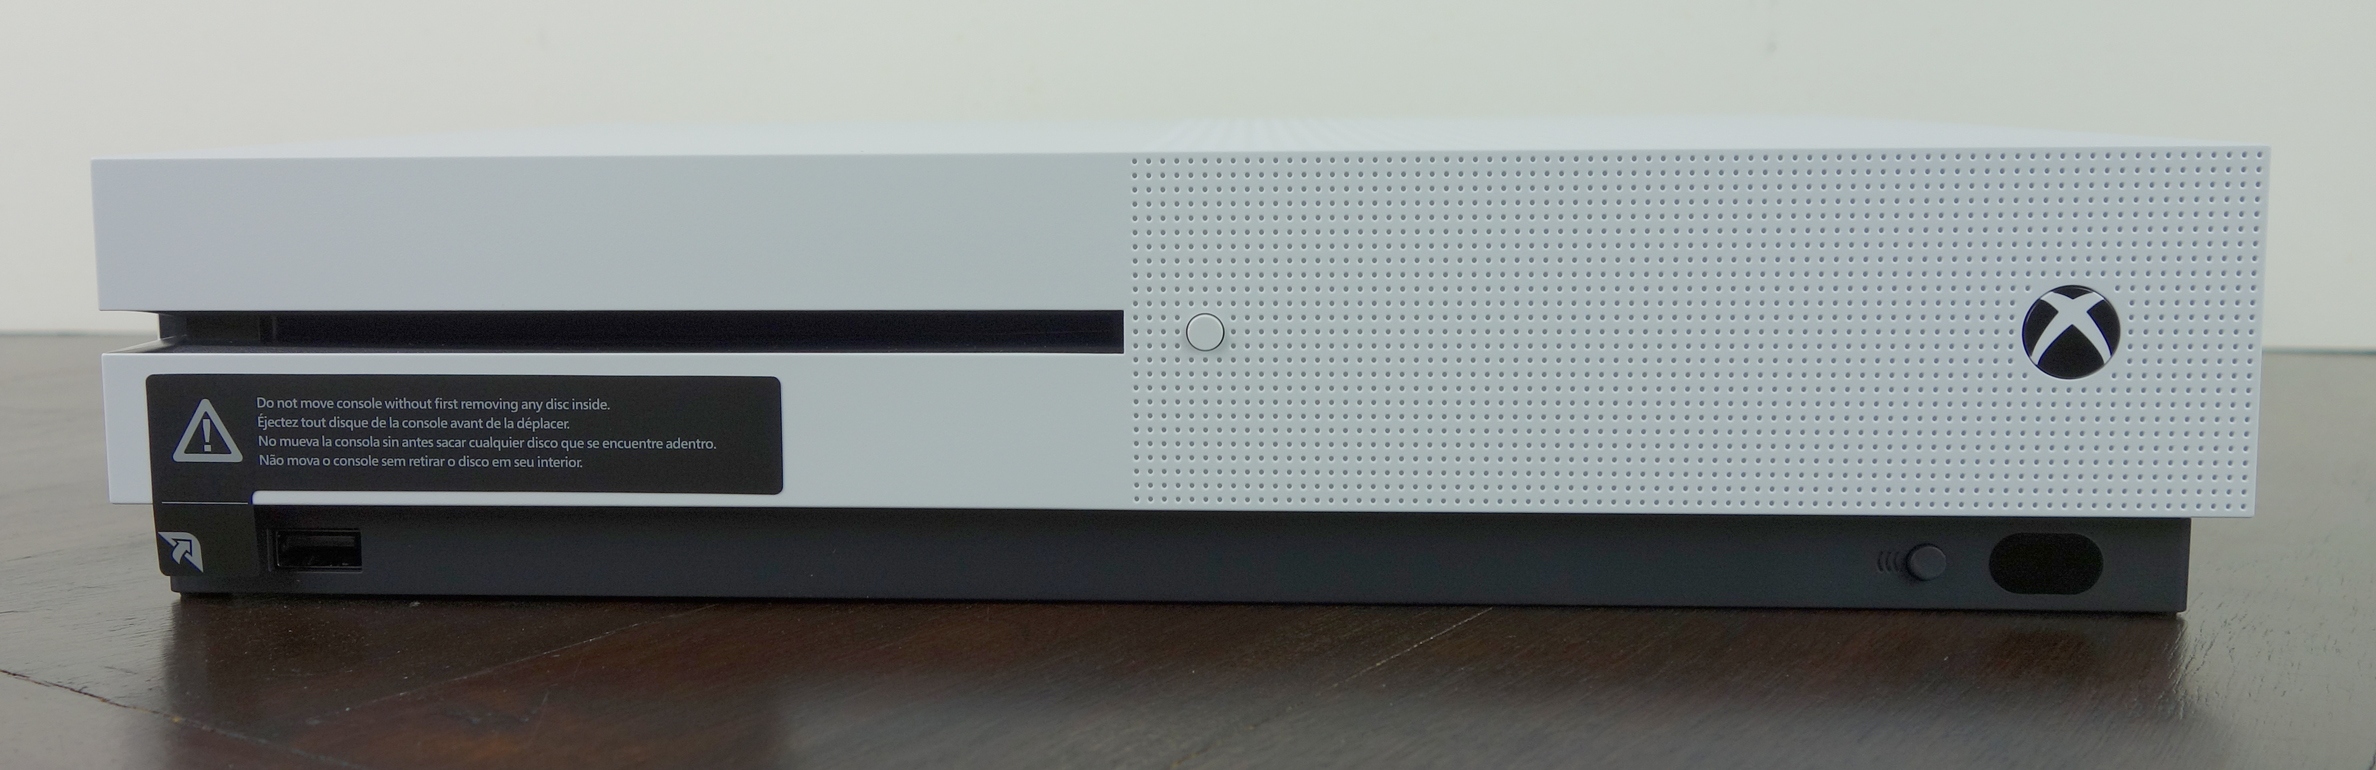 Xbox One S real front